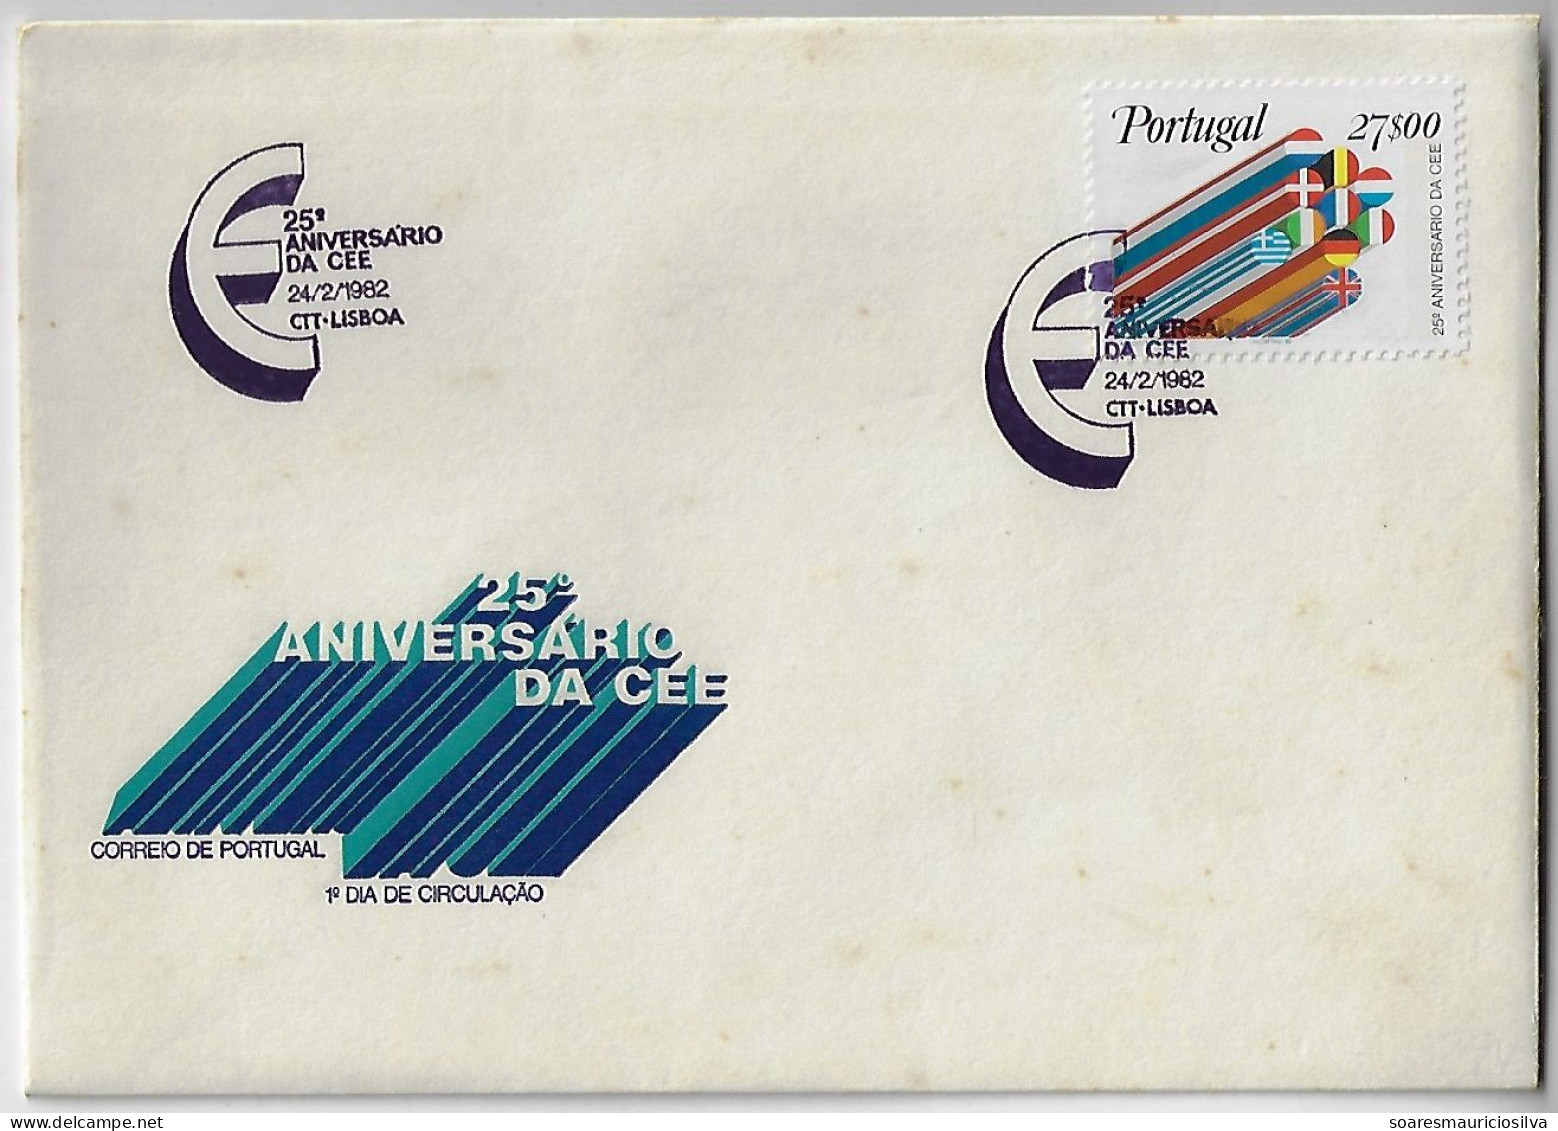 Portugal 1982 FDC 1st Day Cover 25th Anniversary Of The European Economic Community Flag Postmark Euro € Symbol - FDC